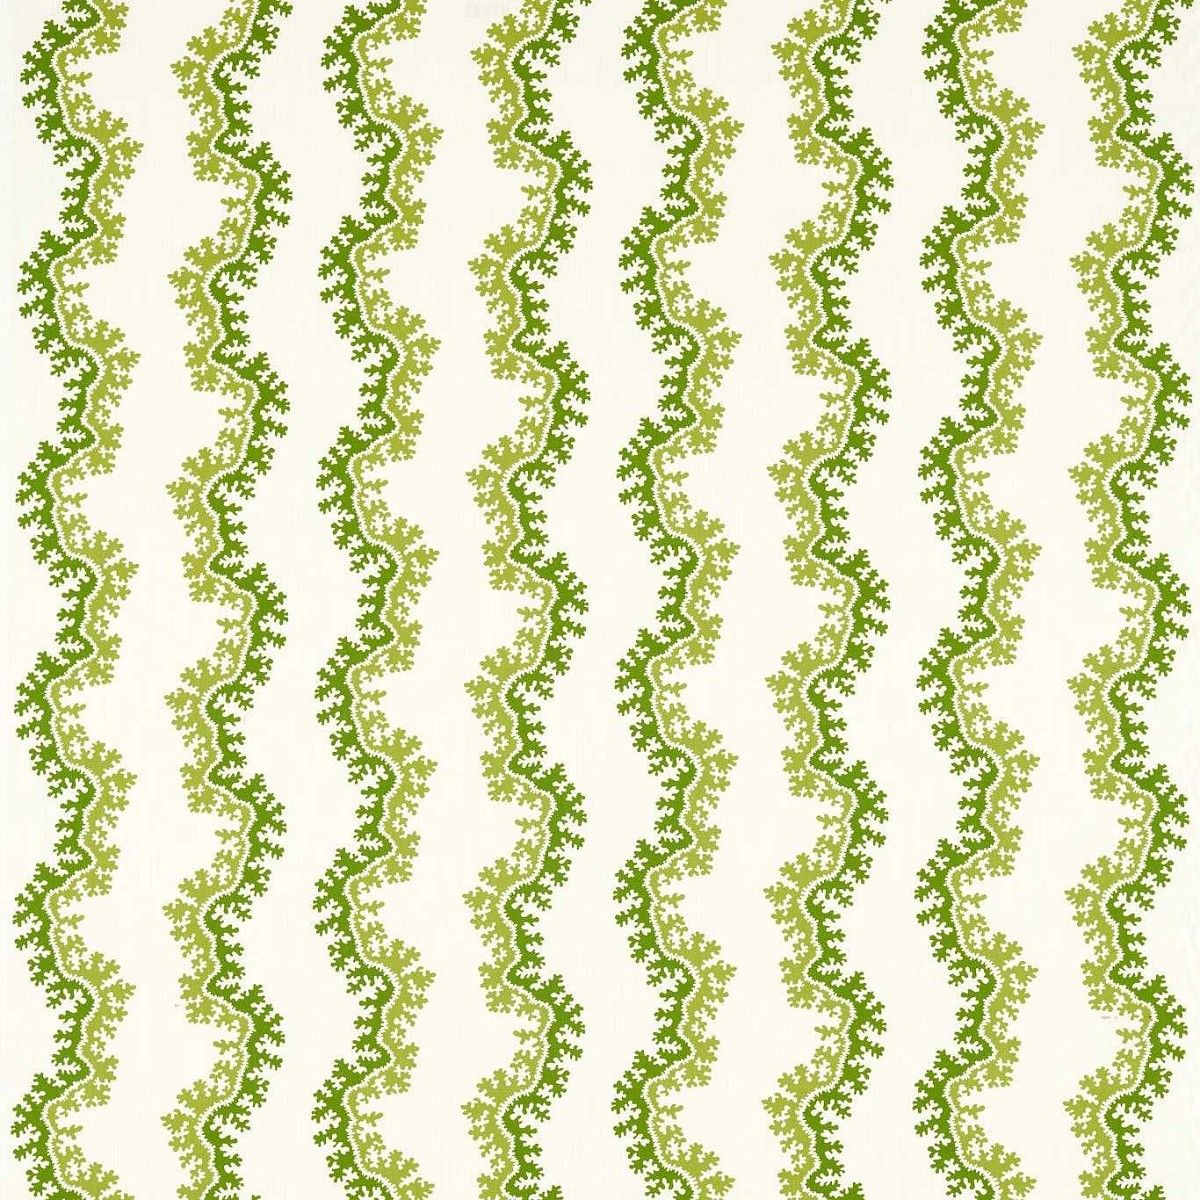 Oxbow Sap Green Fabric by Sanderson